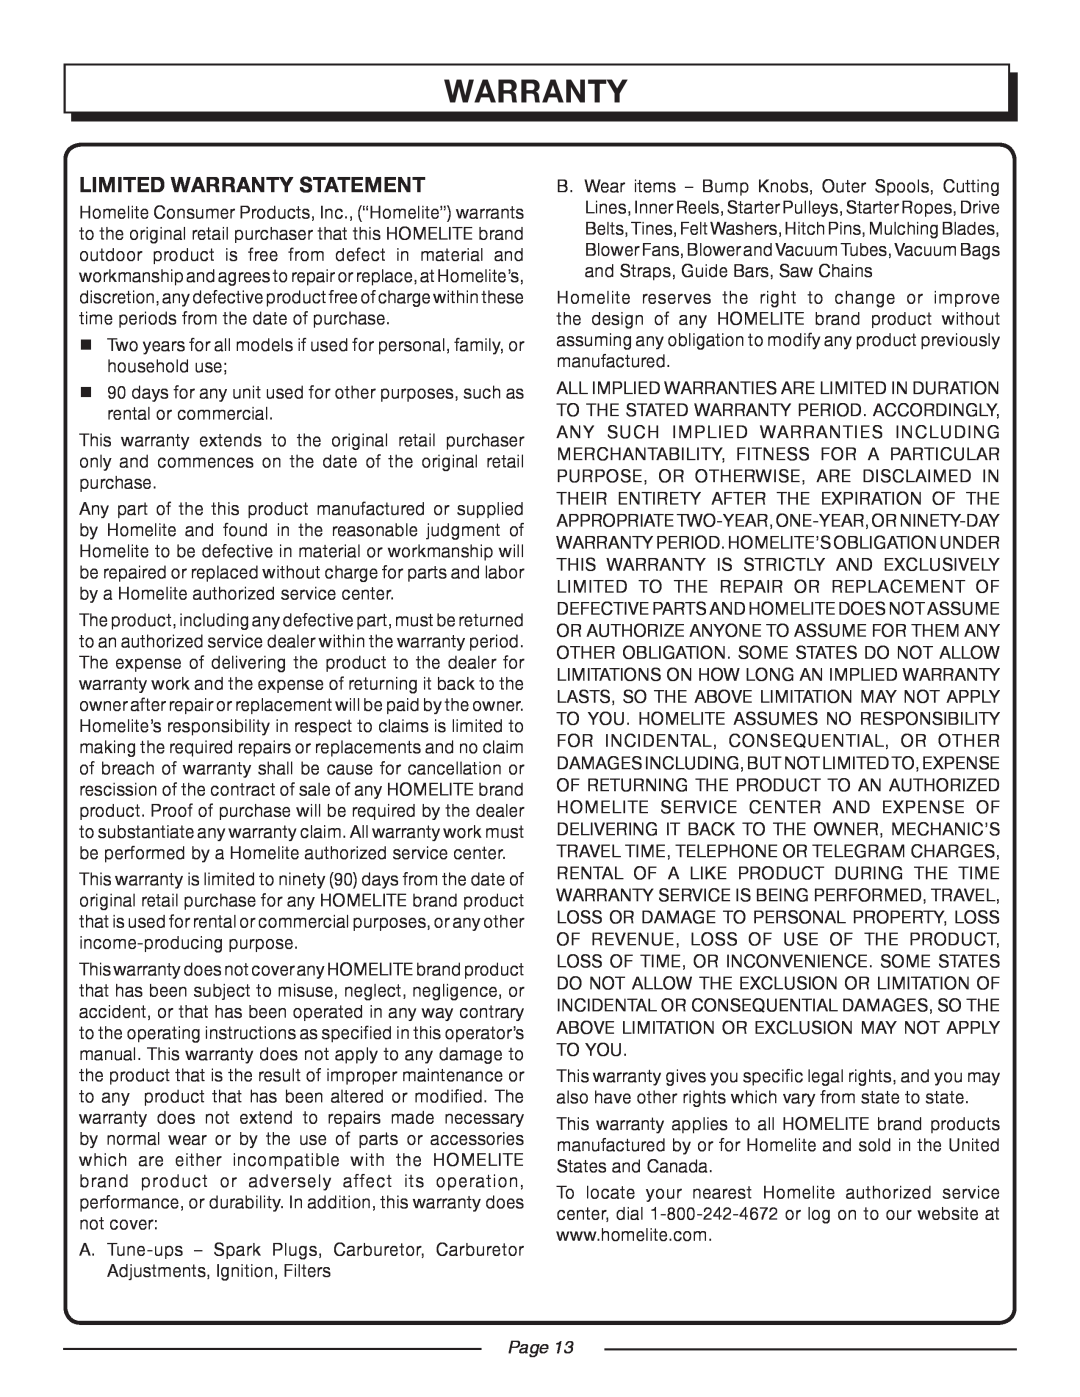 Homelite UT 44100 manual Limited Warranty Statement, Page 